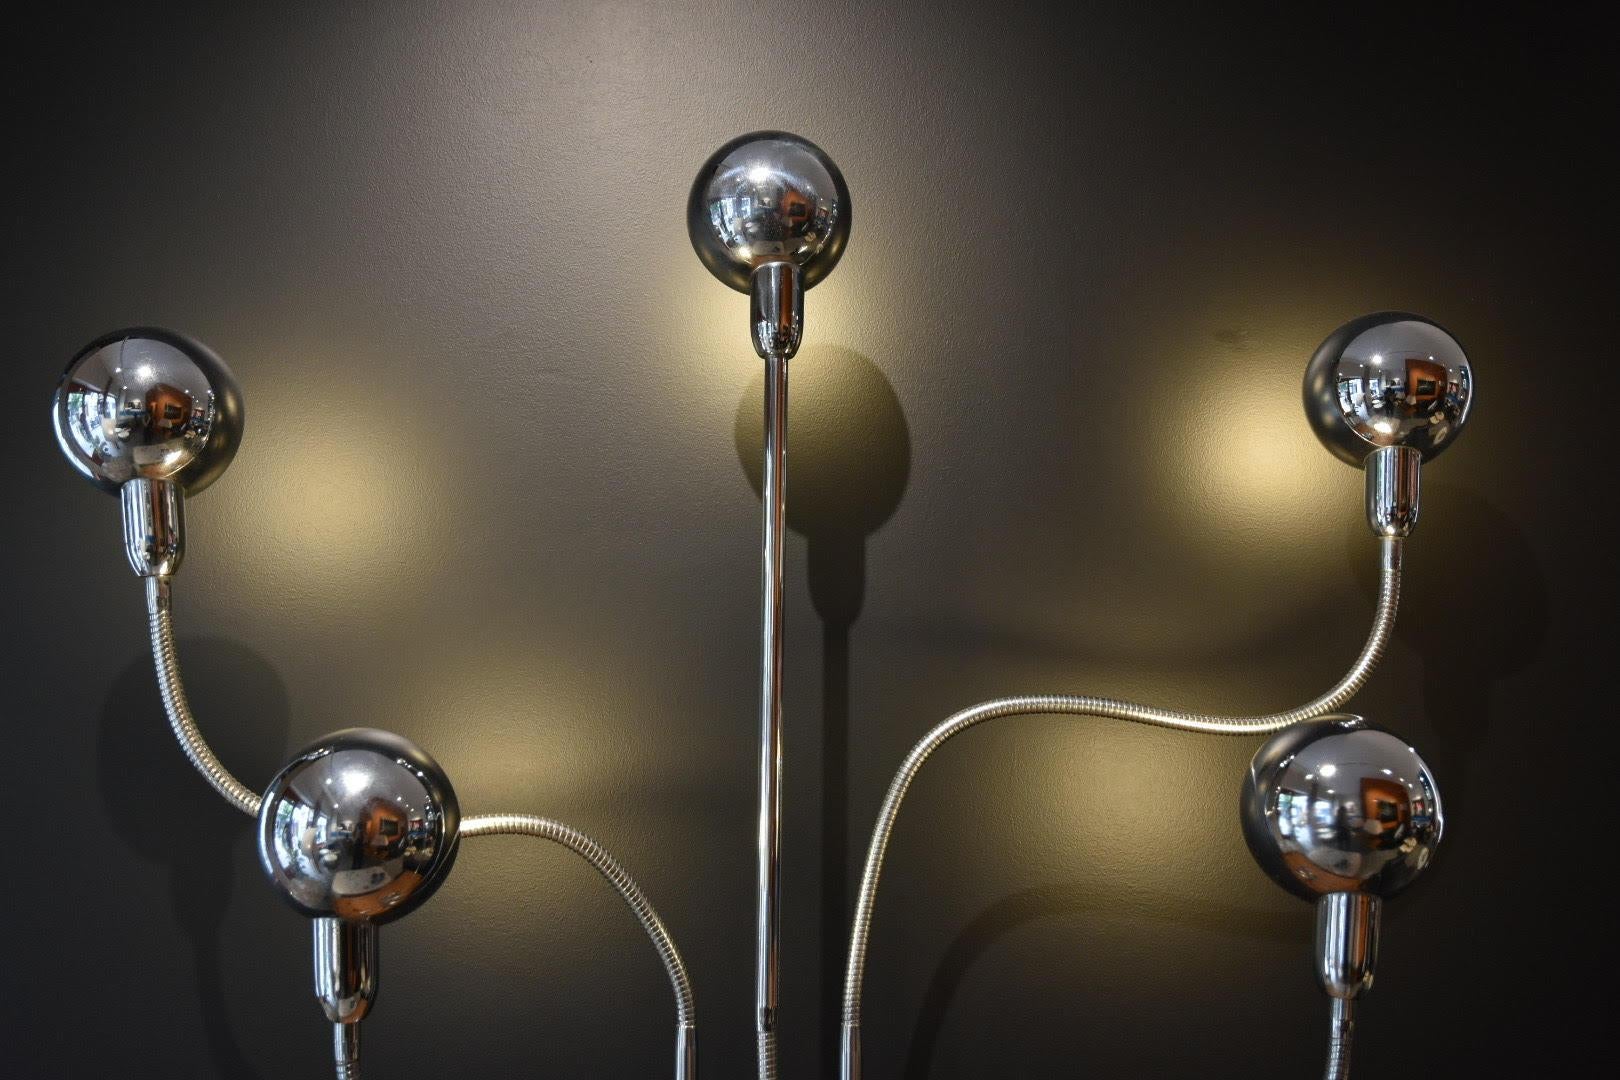 The hydra chrome table lamp was designed by Pierre Folie and manufactured in France in 1969 by Jacques Charpentier. The chrome is in very good condition
This lamp is composed of a square base and 5 directional arms that can be oriented and put in